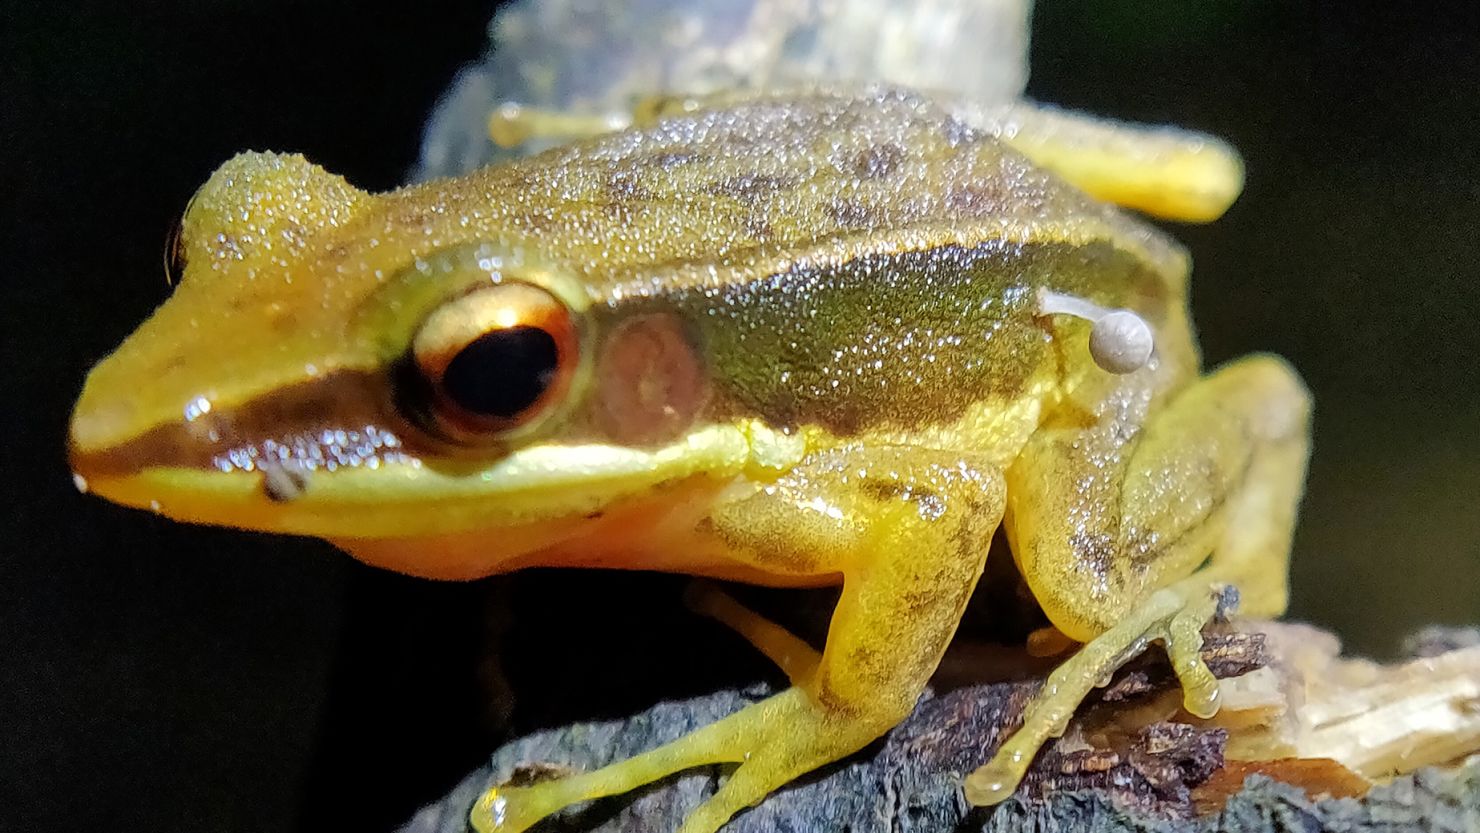 A frog with a tiny mushroom sprouting out of its flank was observed at a roadside pond in Karnataka, India, in a first-of-its-kind discovery.